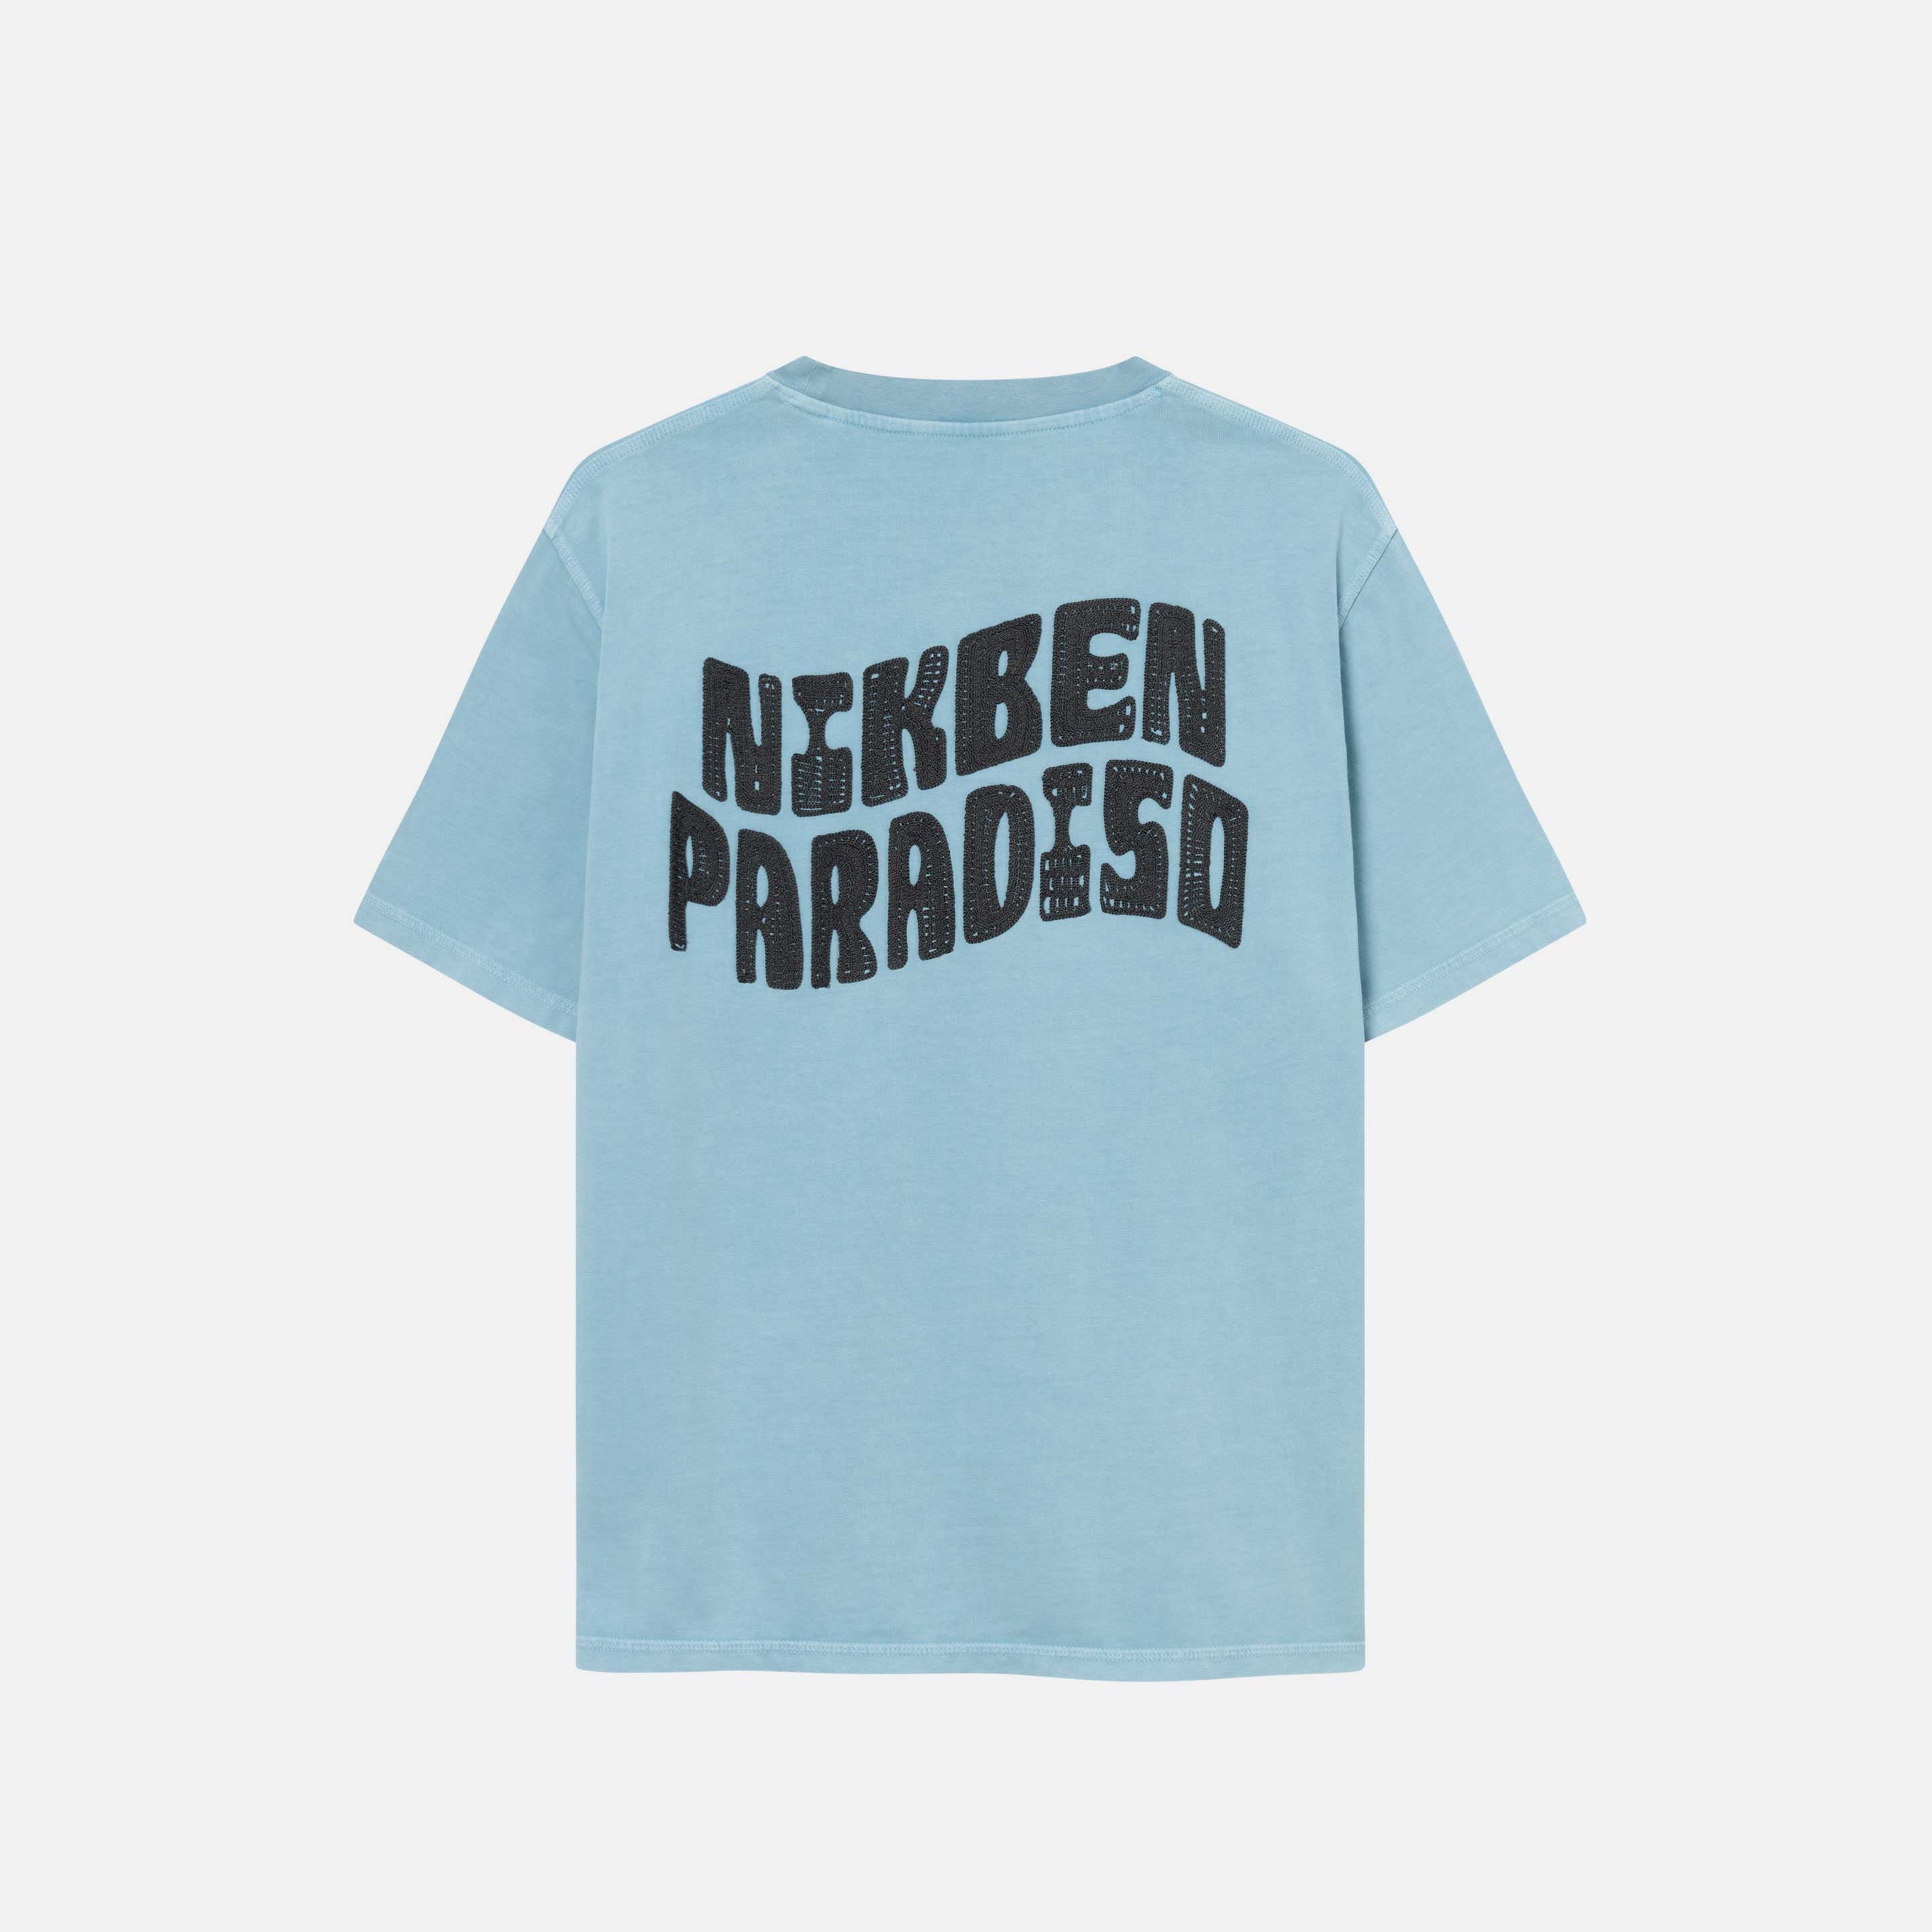 A sky blue t-shirt with "nikben paradiso" embroidery on its back